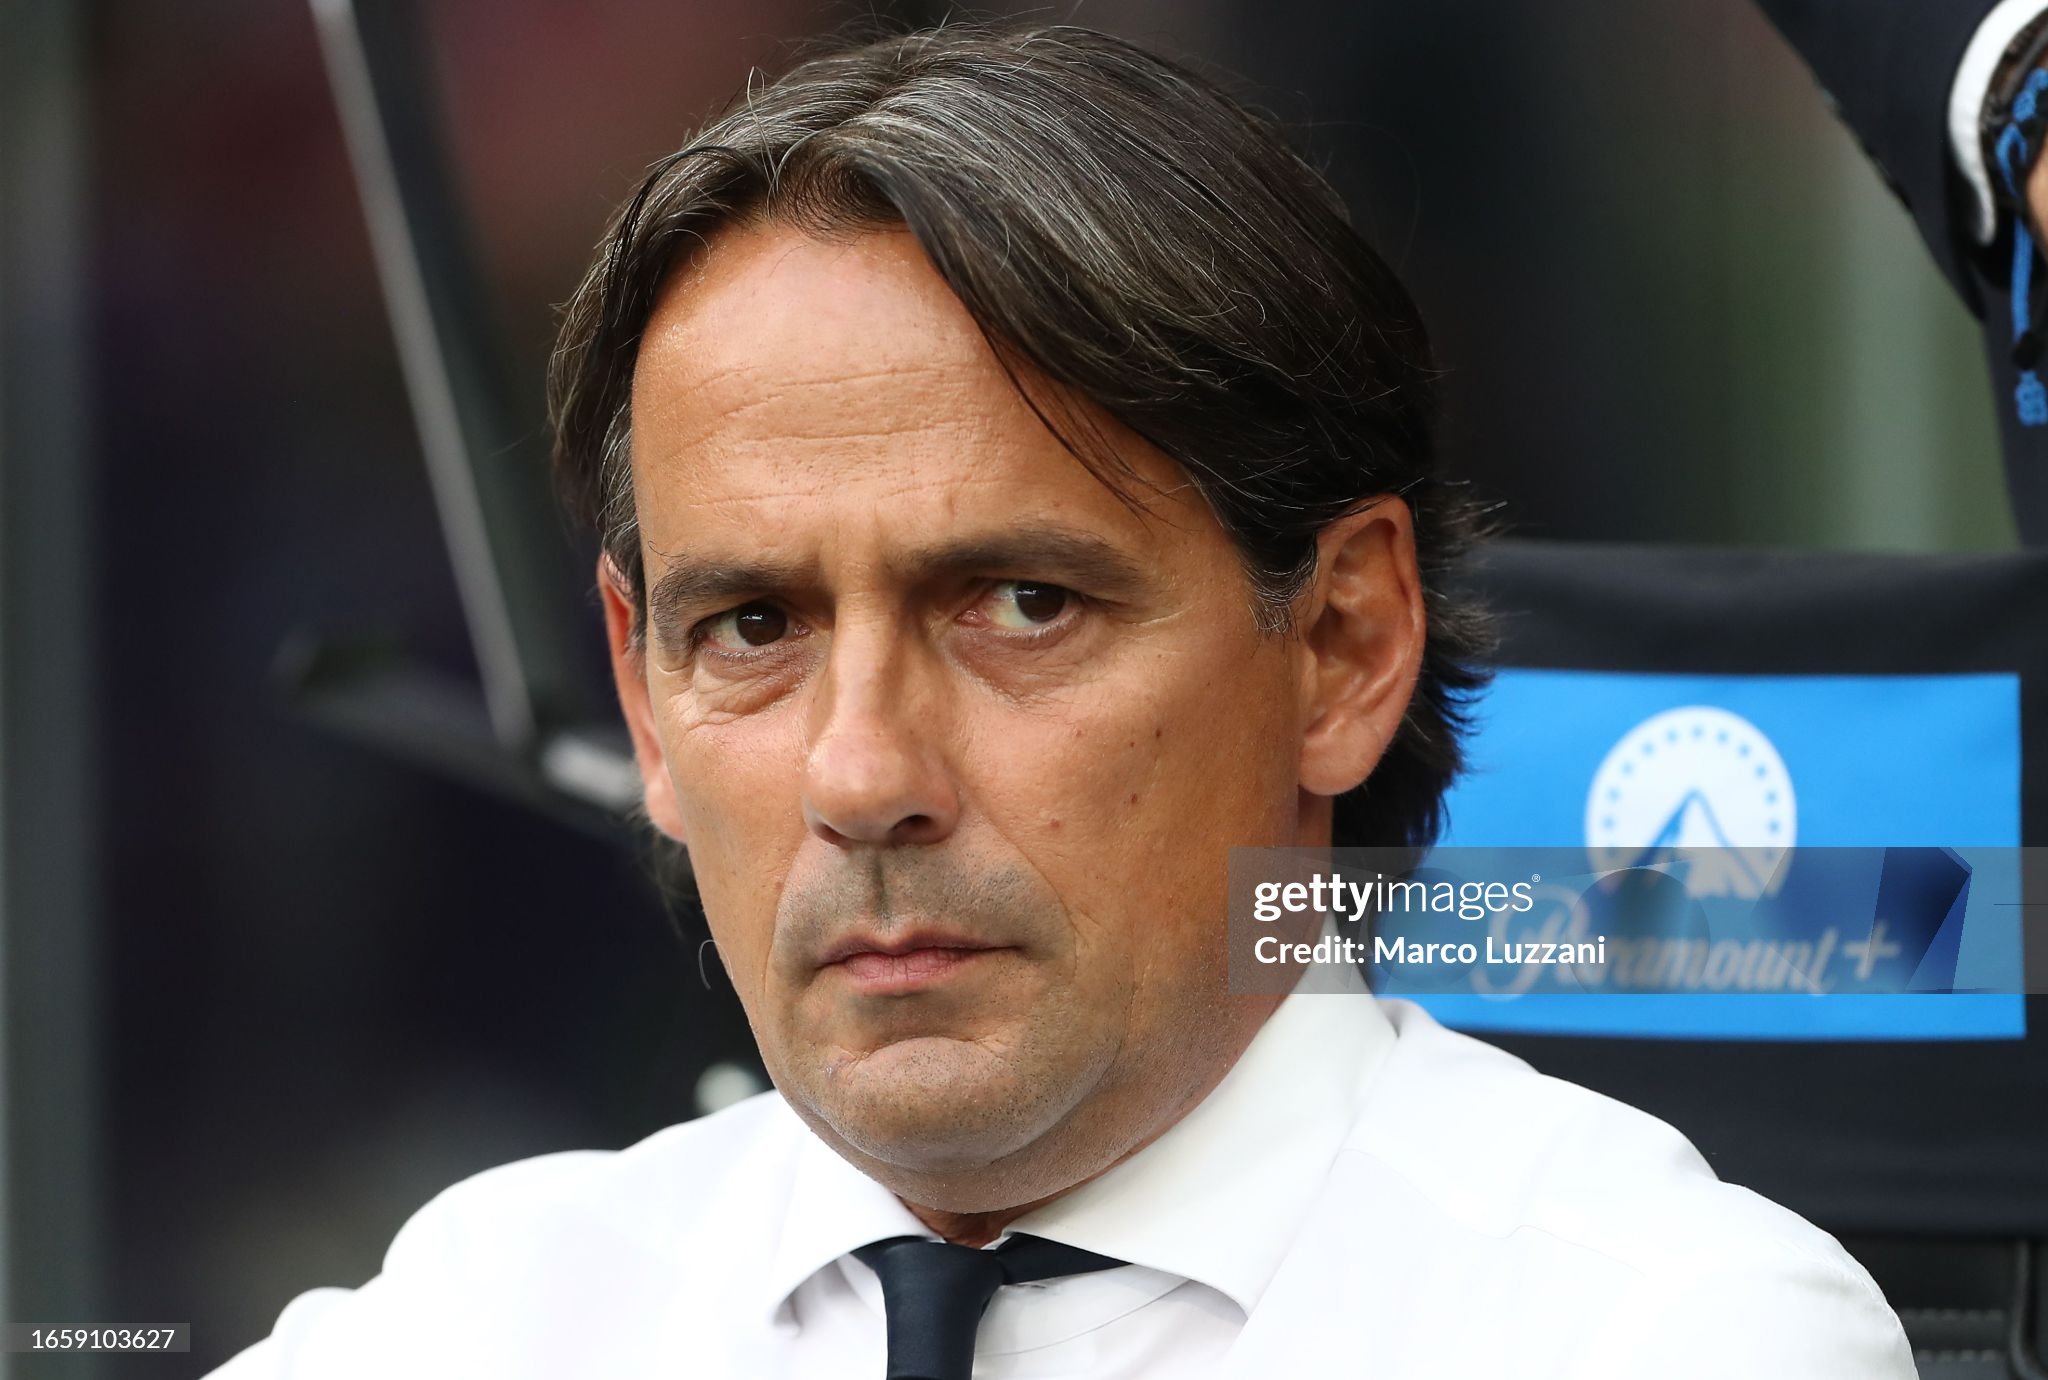 Head coach Simone Inzaghi signs new deal at Inter Milan